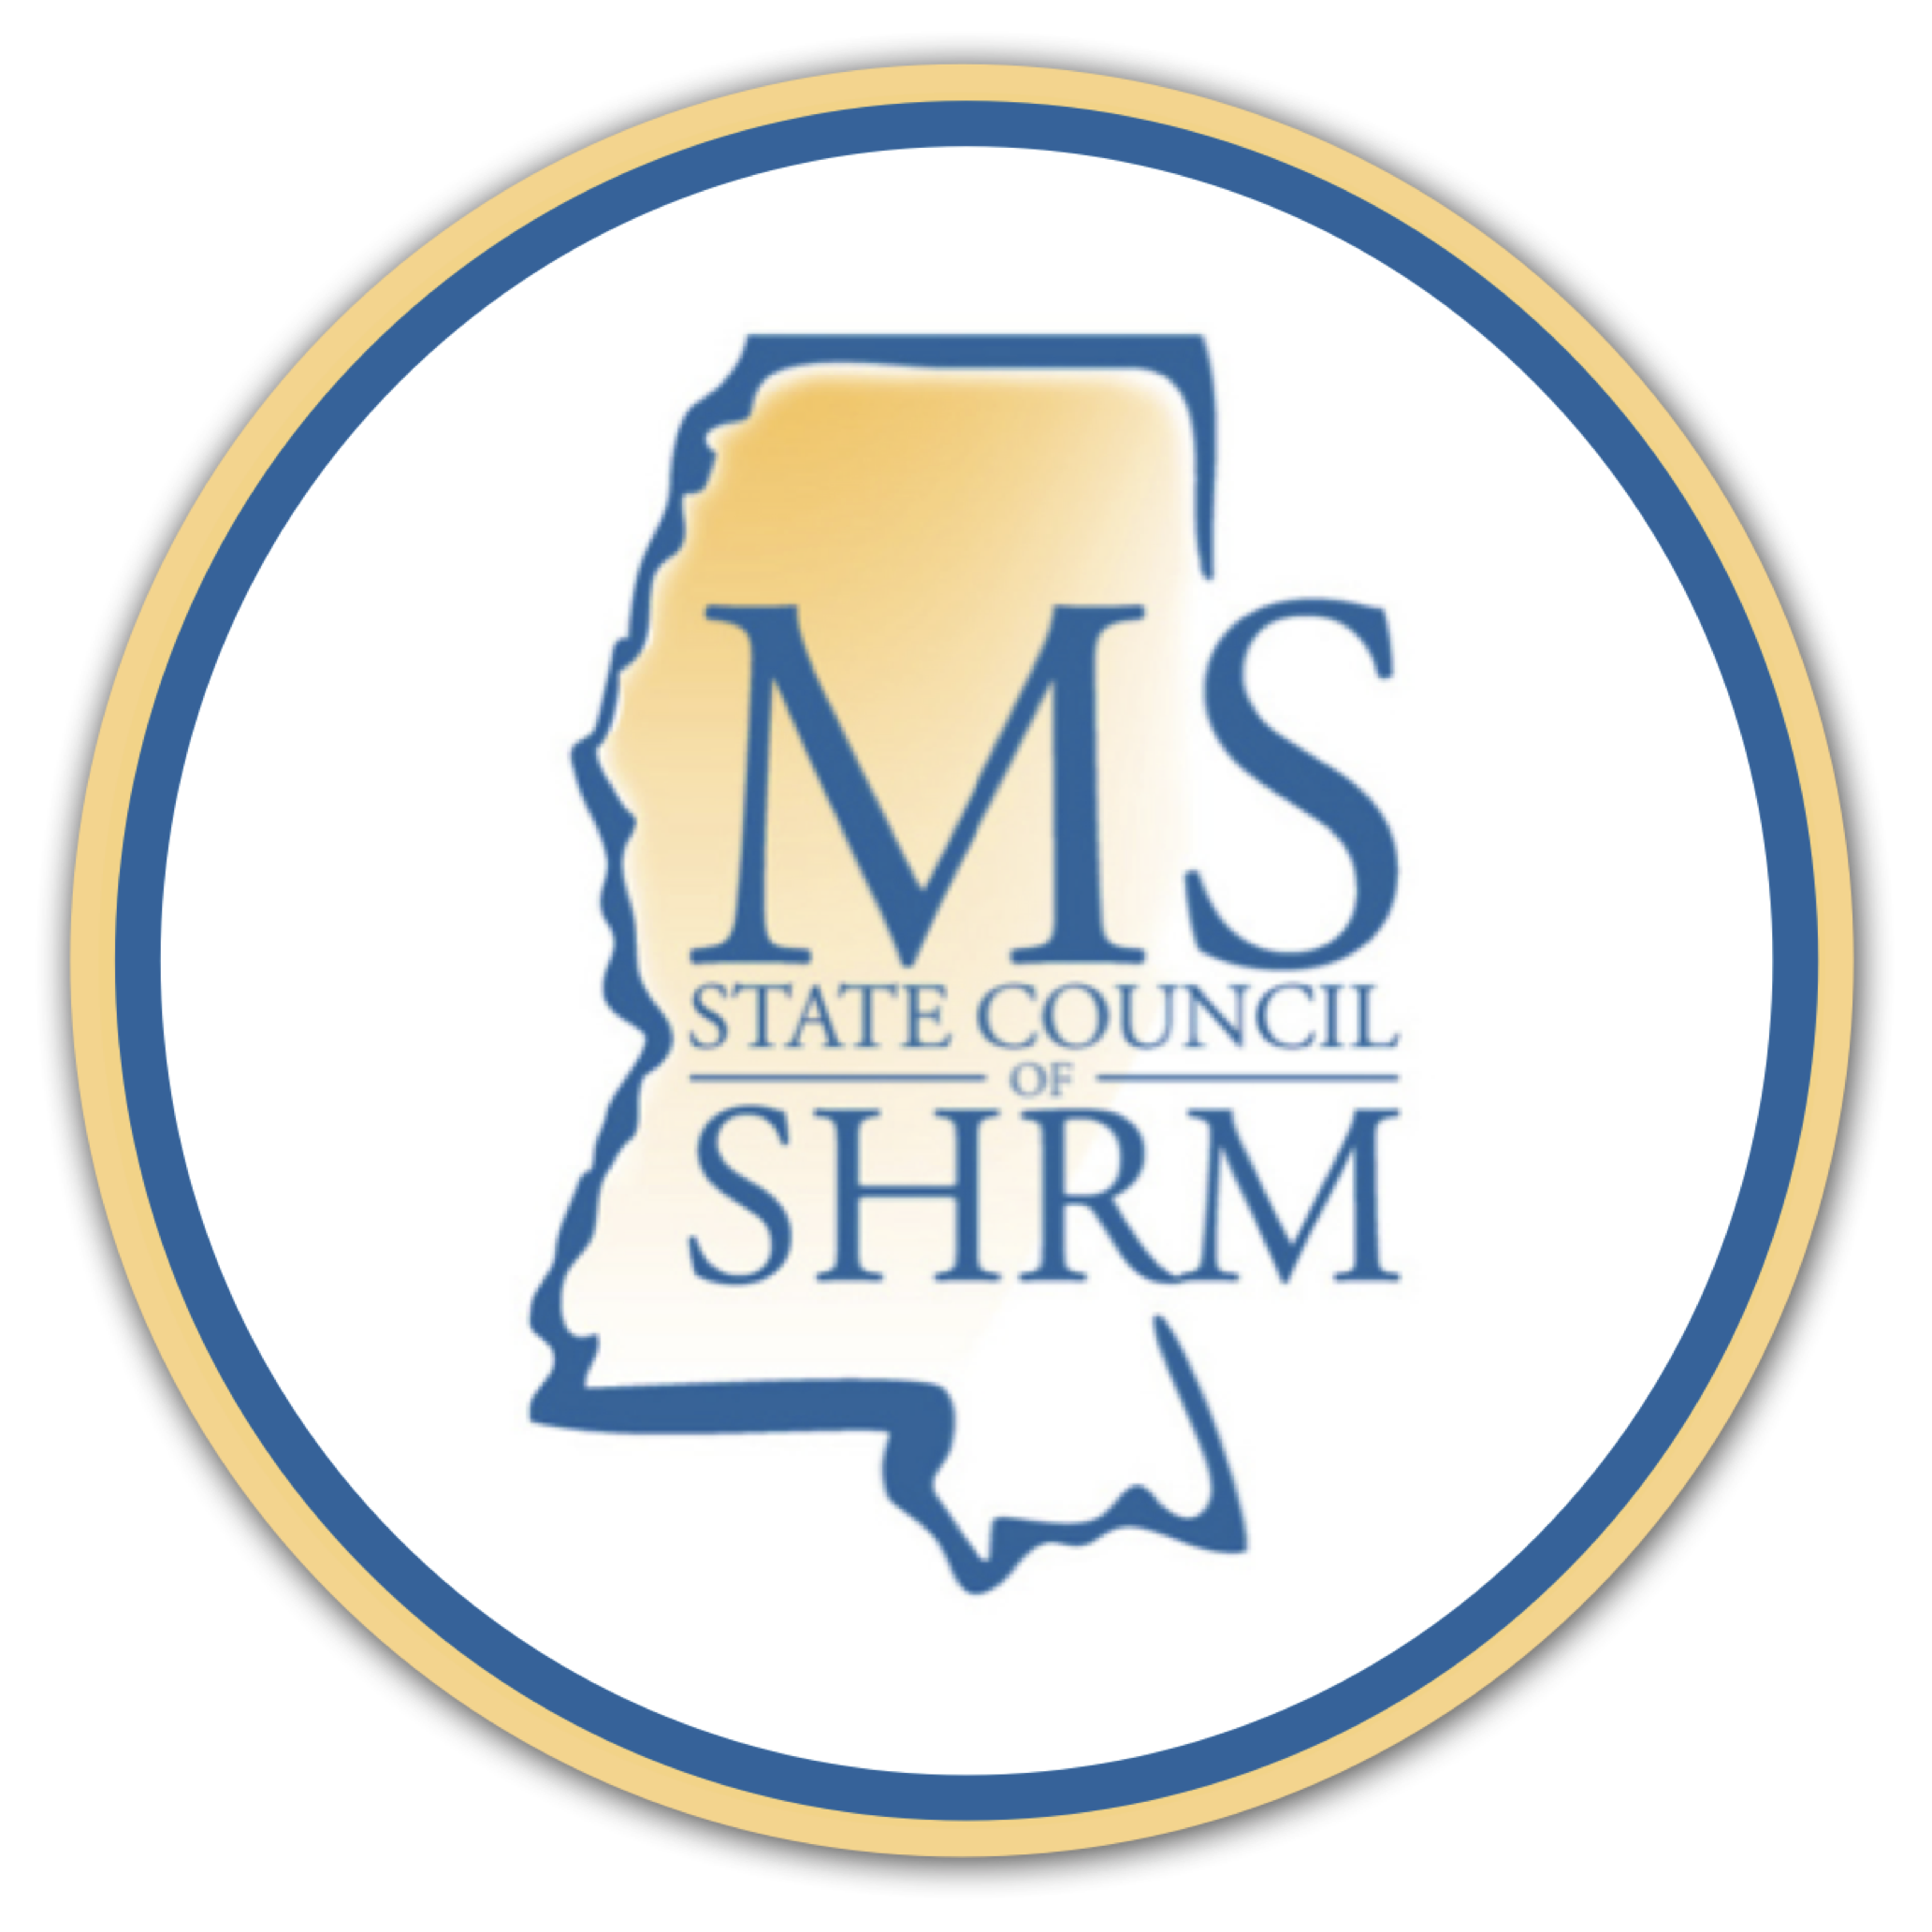 Contact Mississippi State Council of SHRM